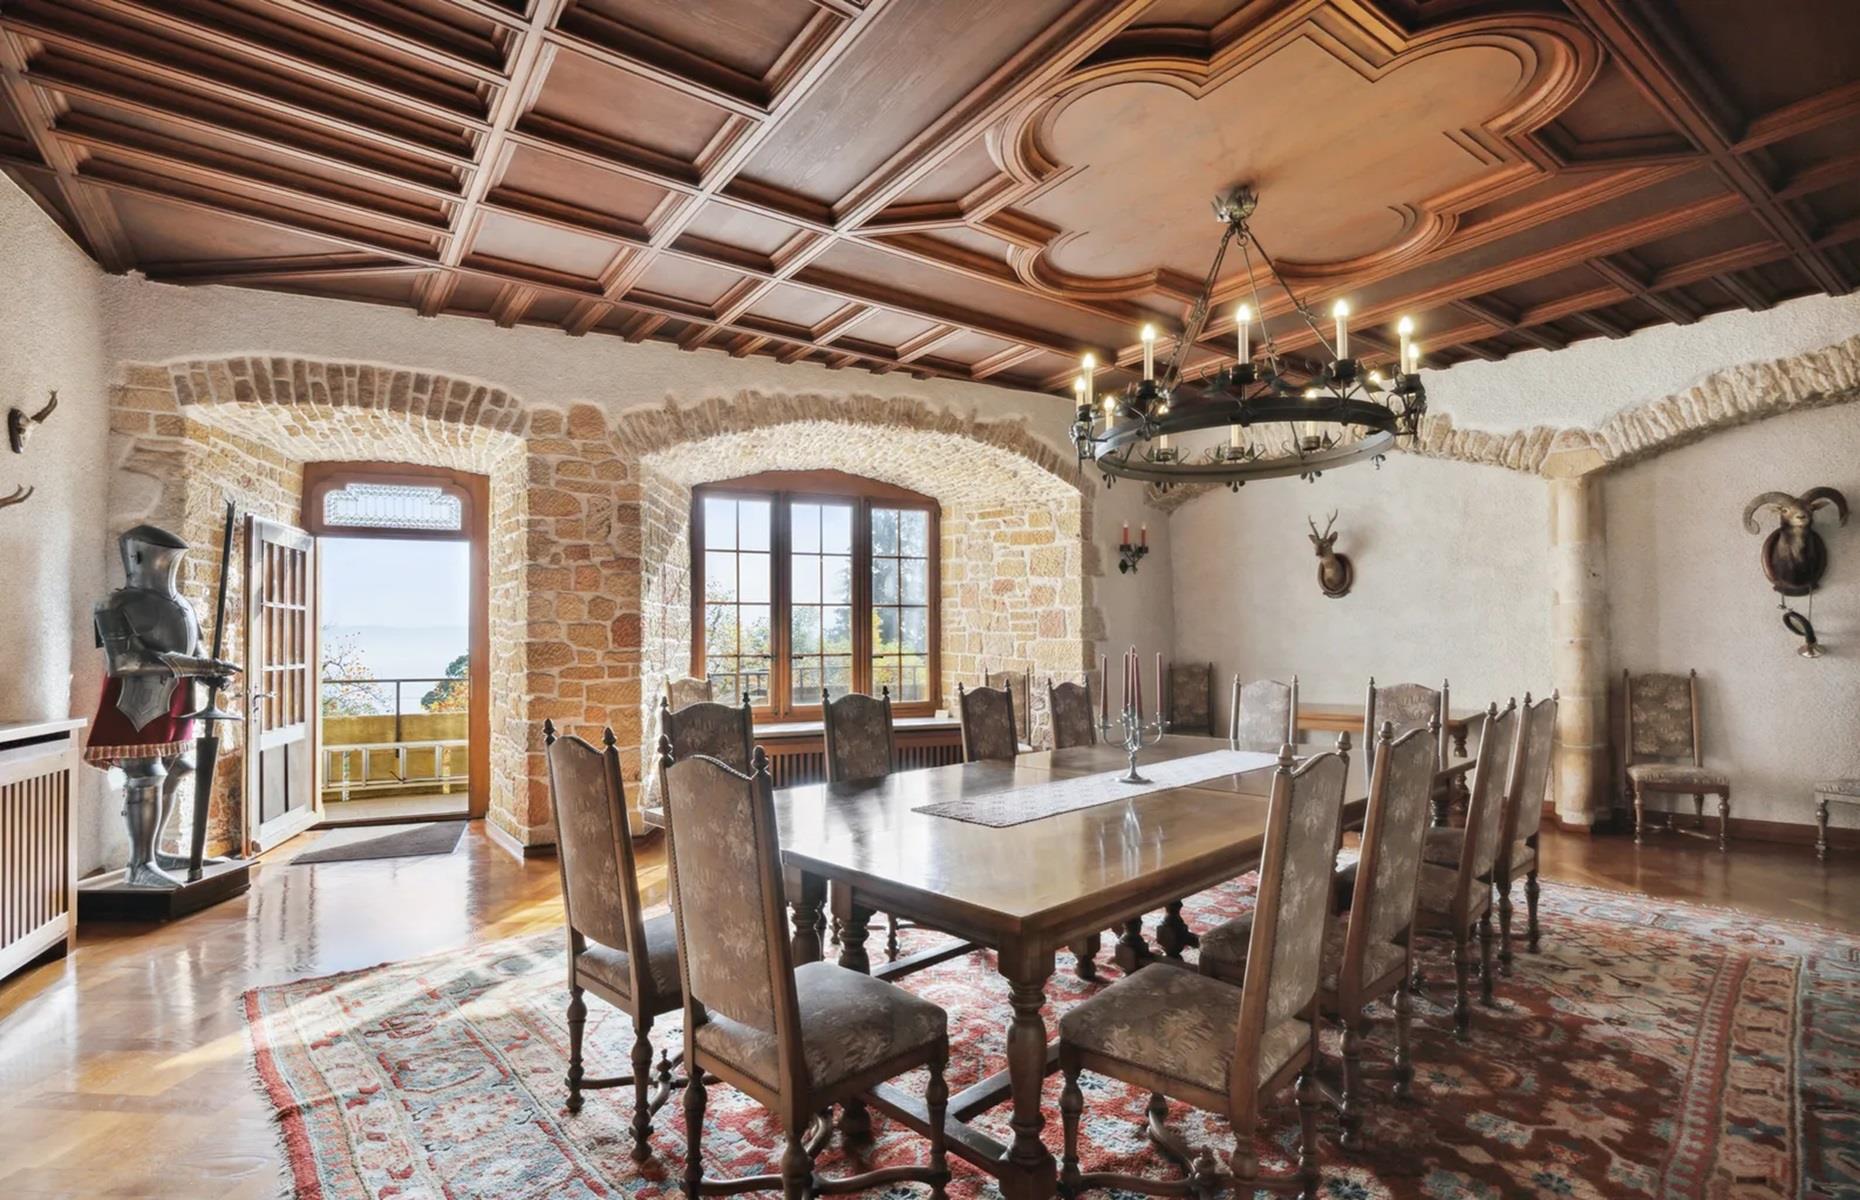 <p>This formal dining room has to be one of the castle's most impressive spaces. With its stunning wooden ceiling, exposed stonework, glossy parquet floor and medieval-inspired details, it's certainly a room that would be fit for a king or queen's banquet. Plus, its windows frame truly unforgettable landscape views.</p>